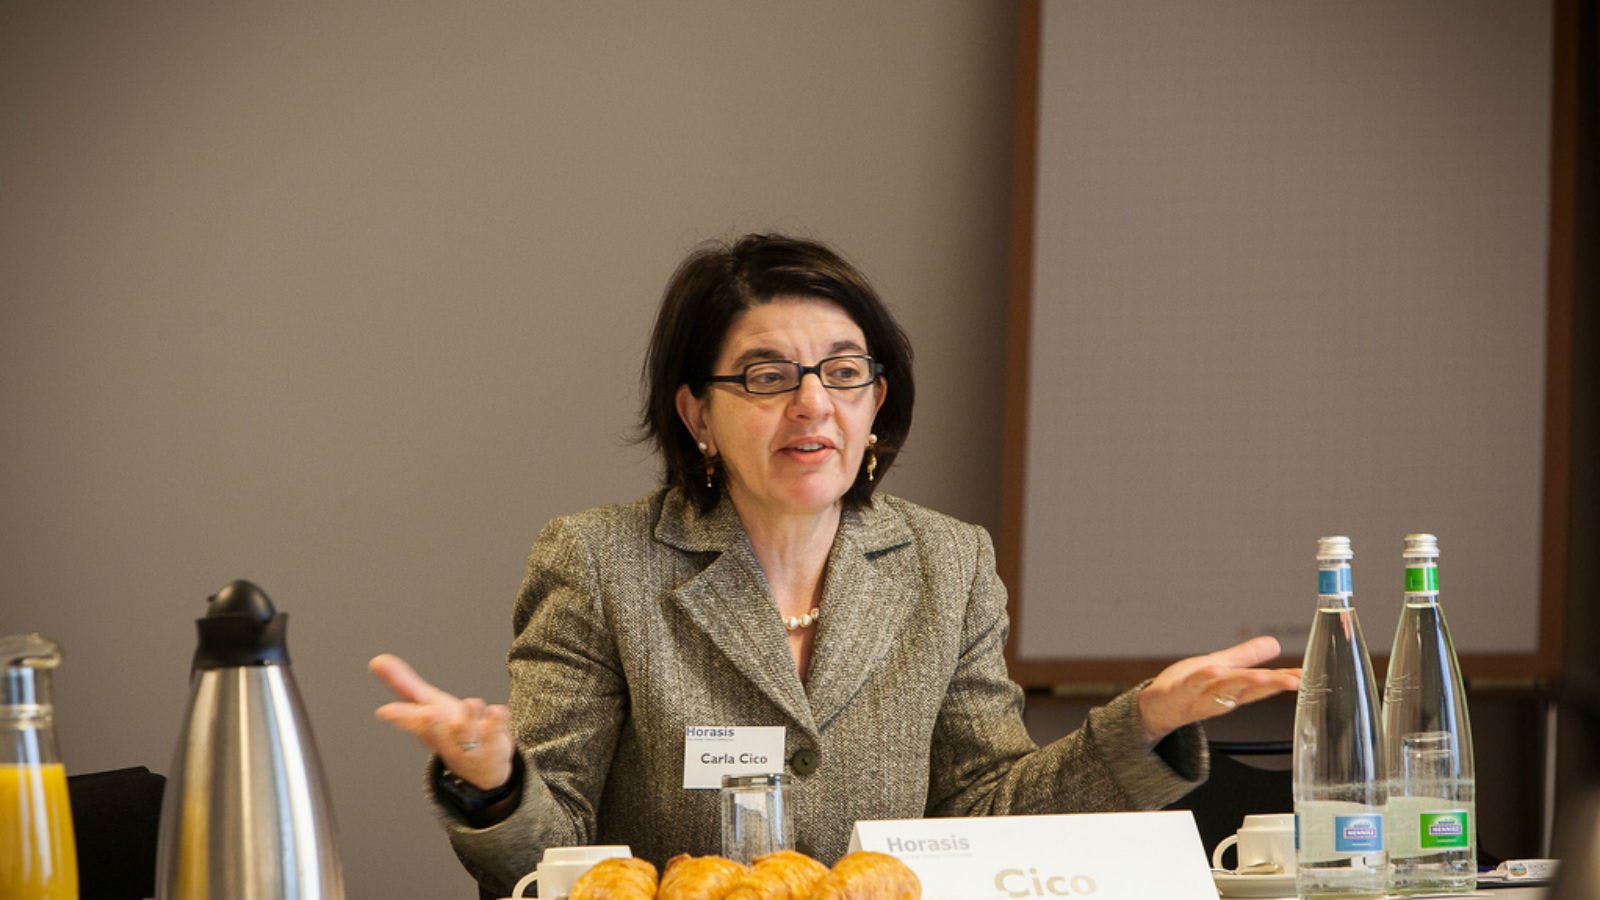 Carla Cico, Forbes' 32nd most powerful woman